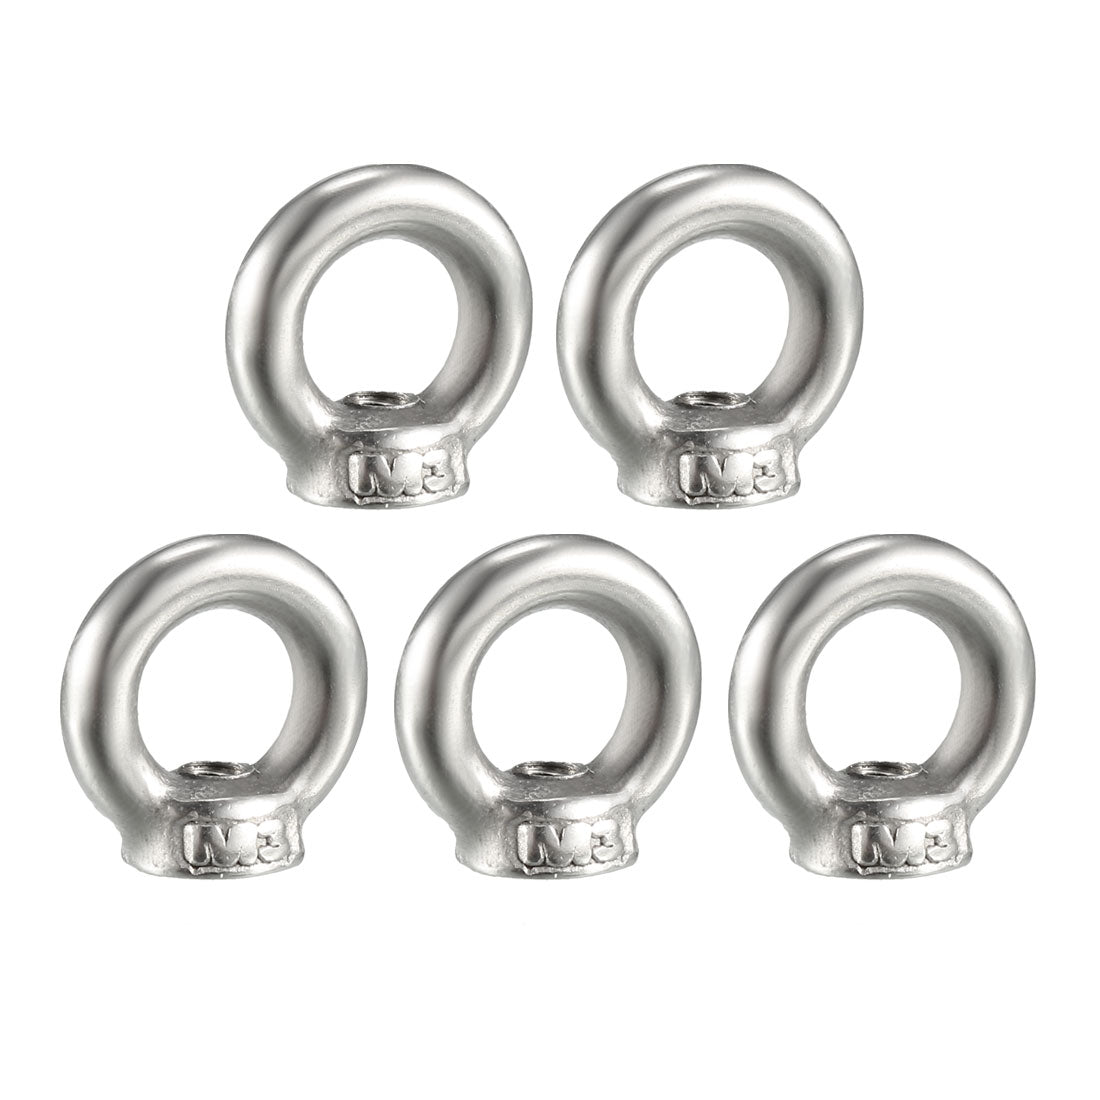 uxcell Uxcell M3 Female Thread 304 Stainless Steel Lifting Eye Nuts Ring 5pcs